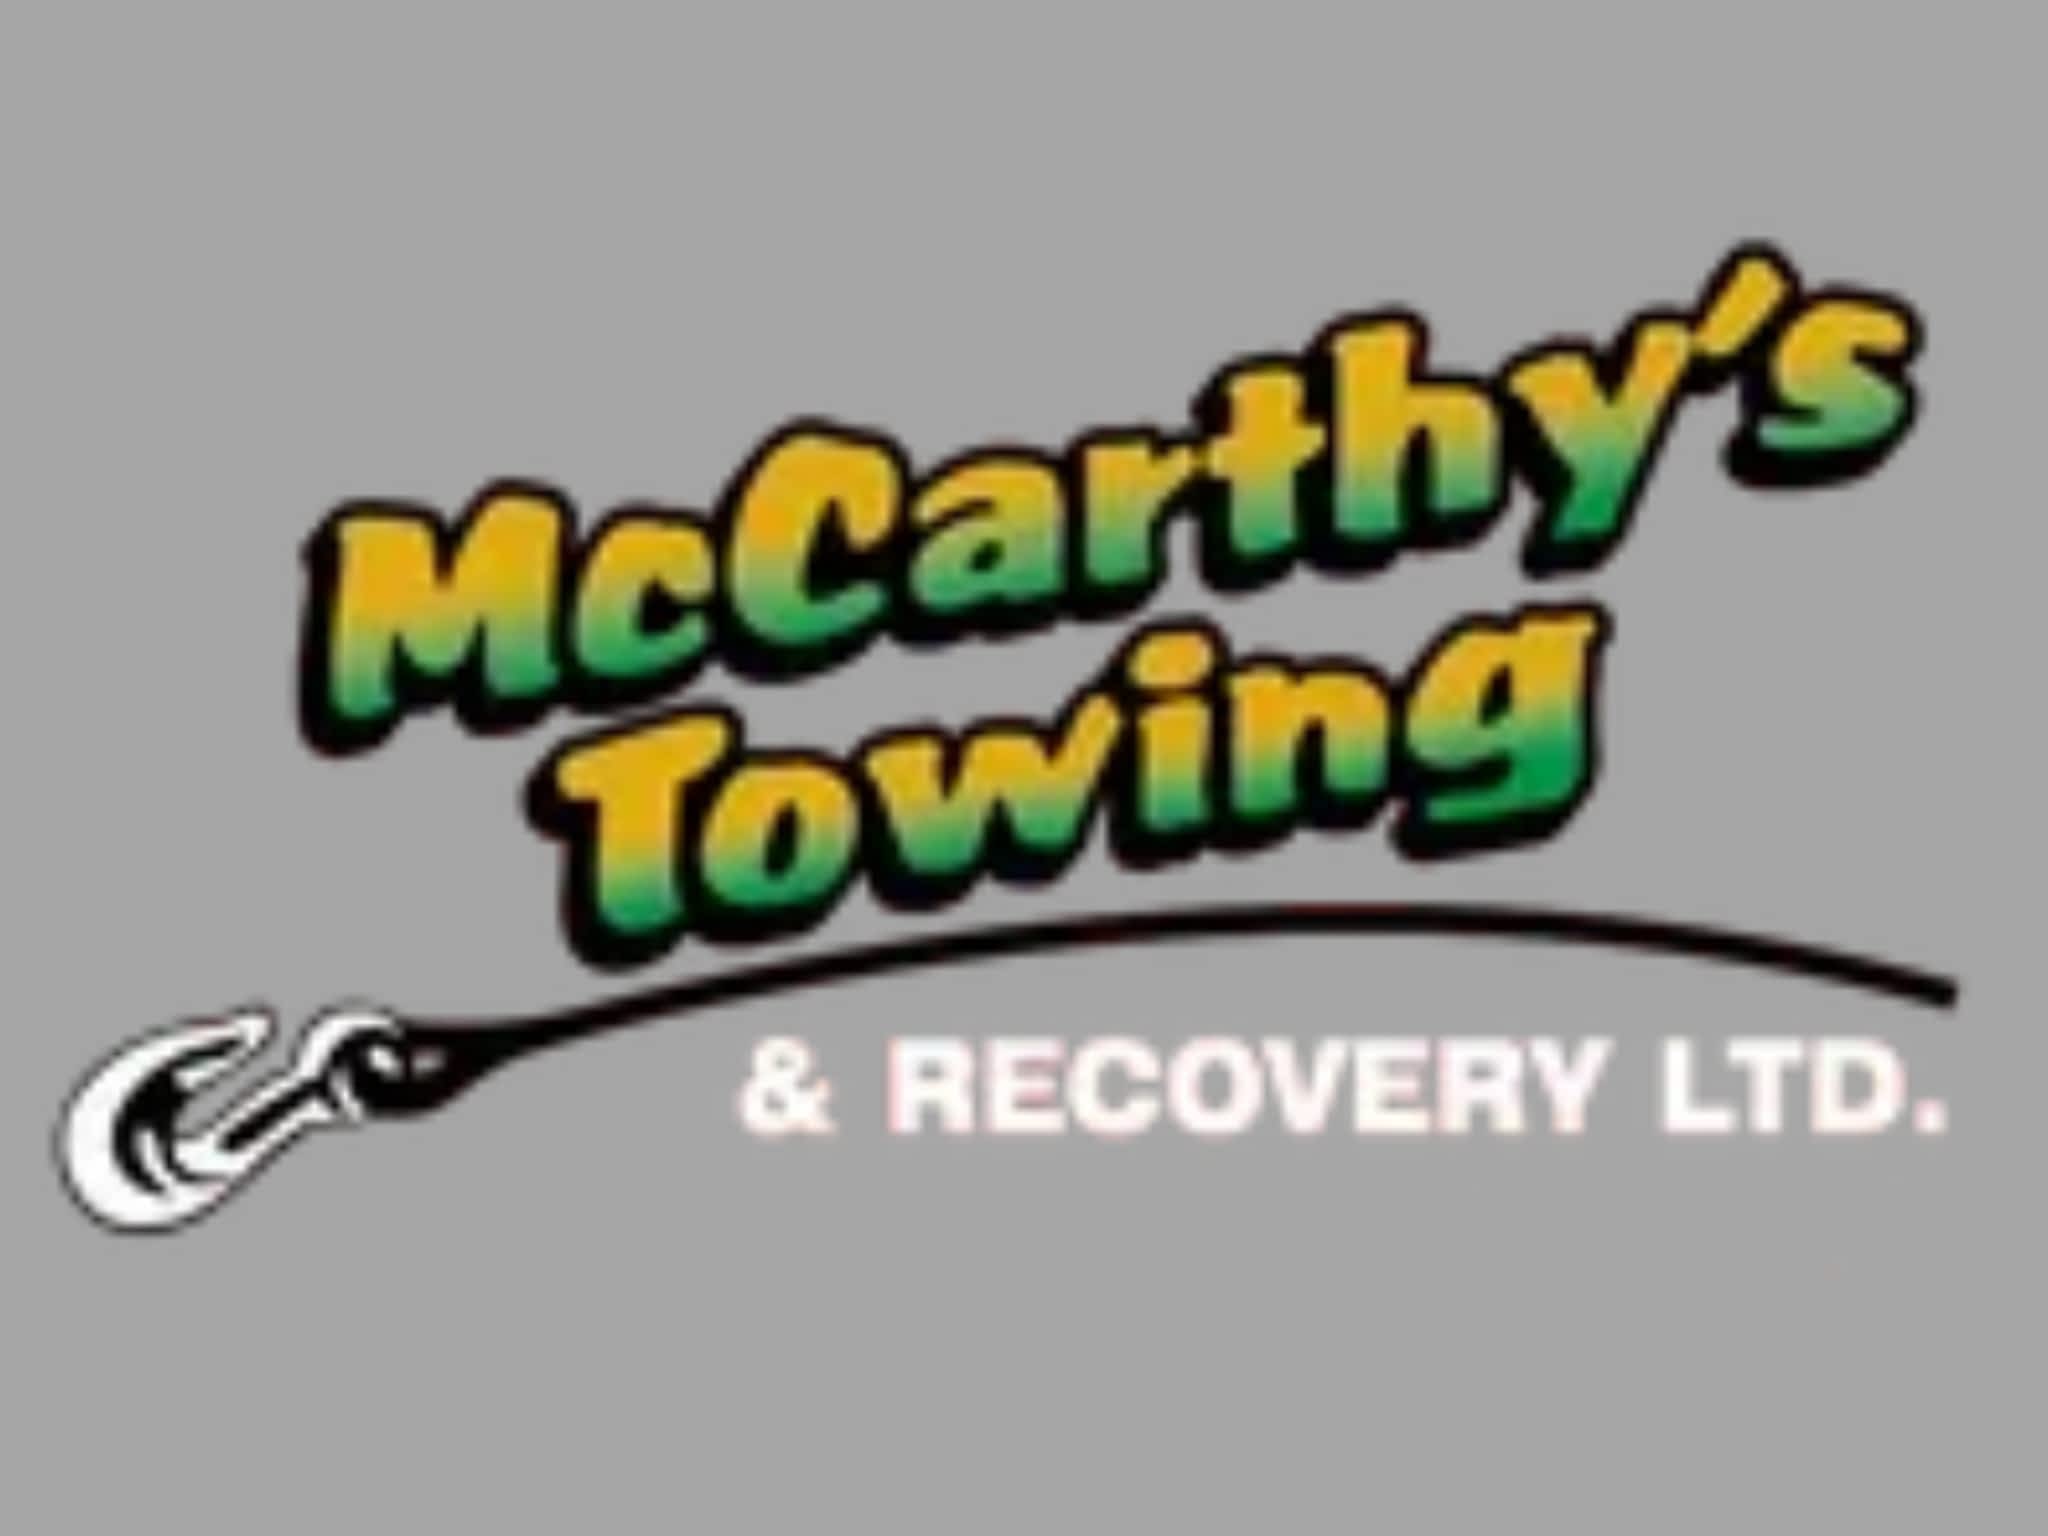 photo McCarthy's Towing & Recovery Ltd